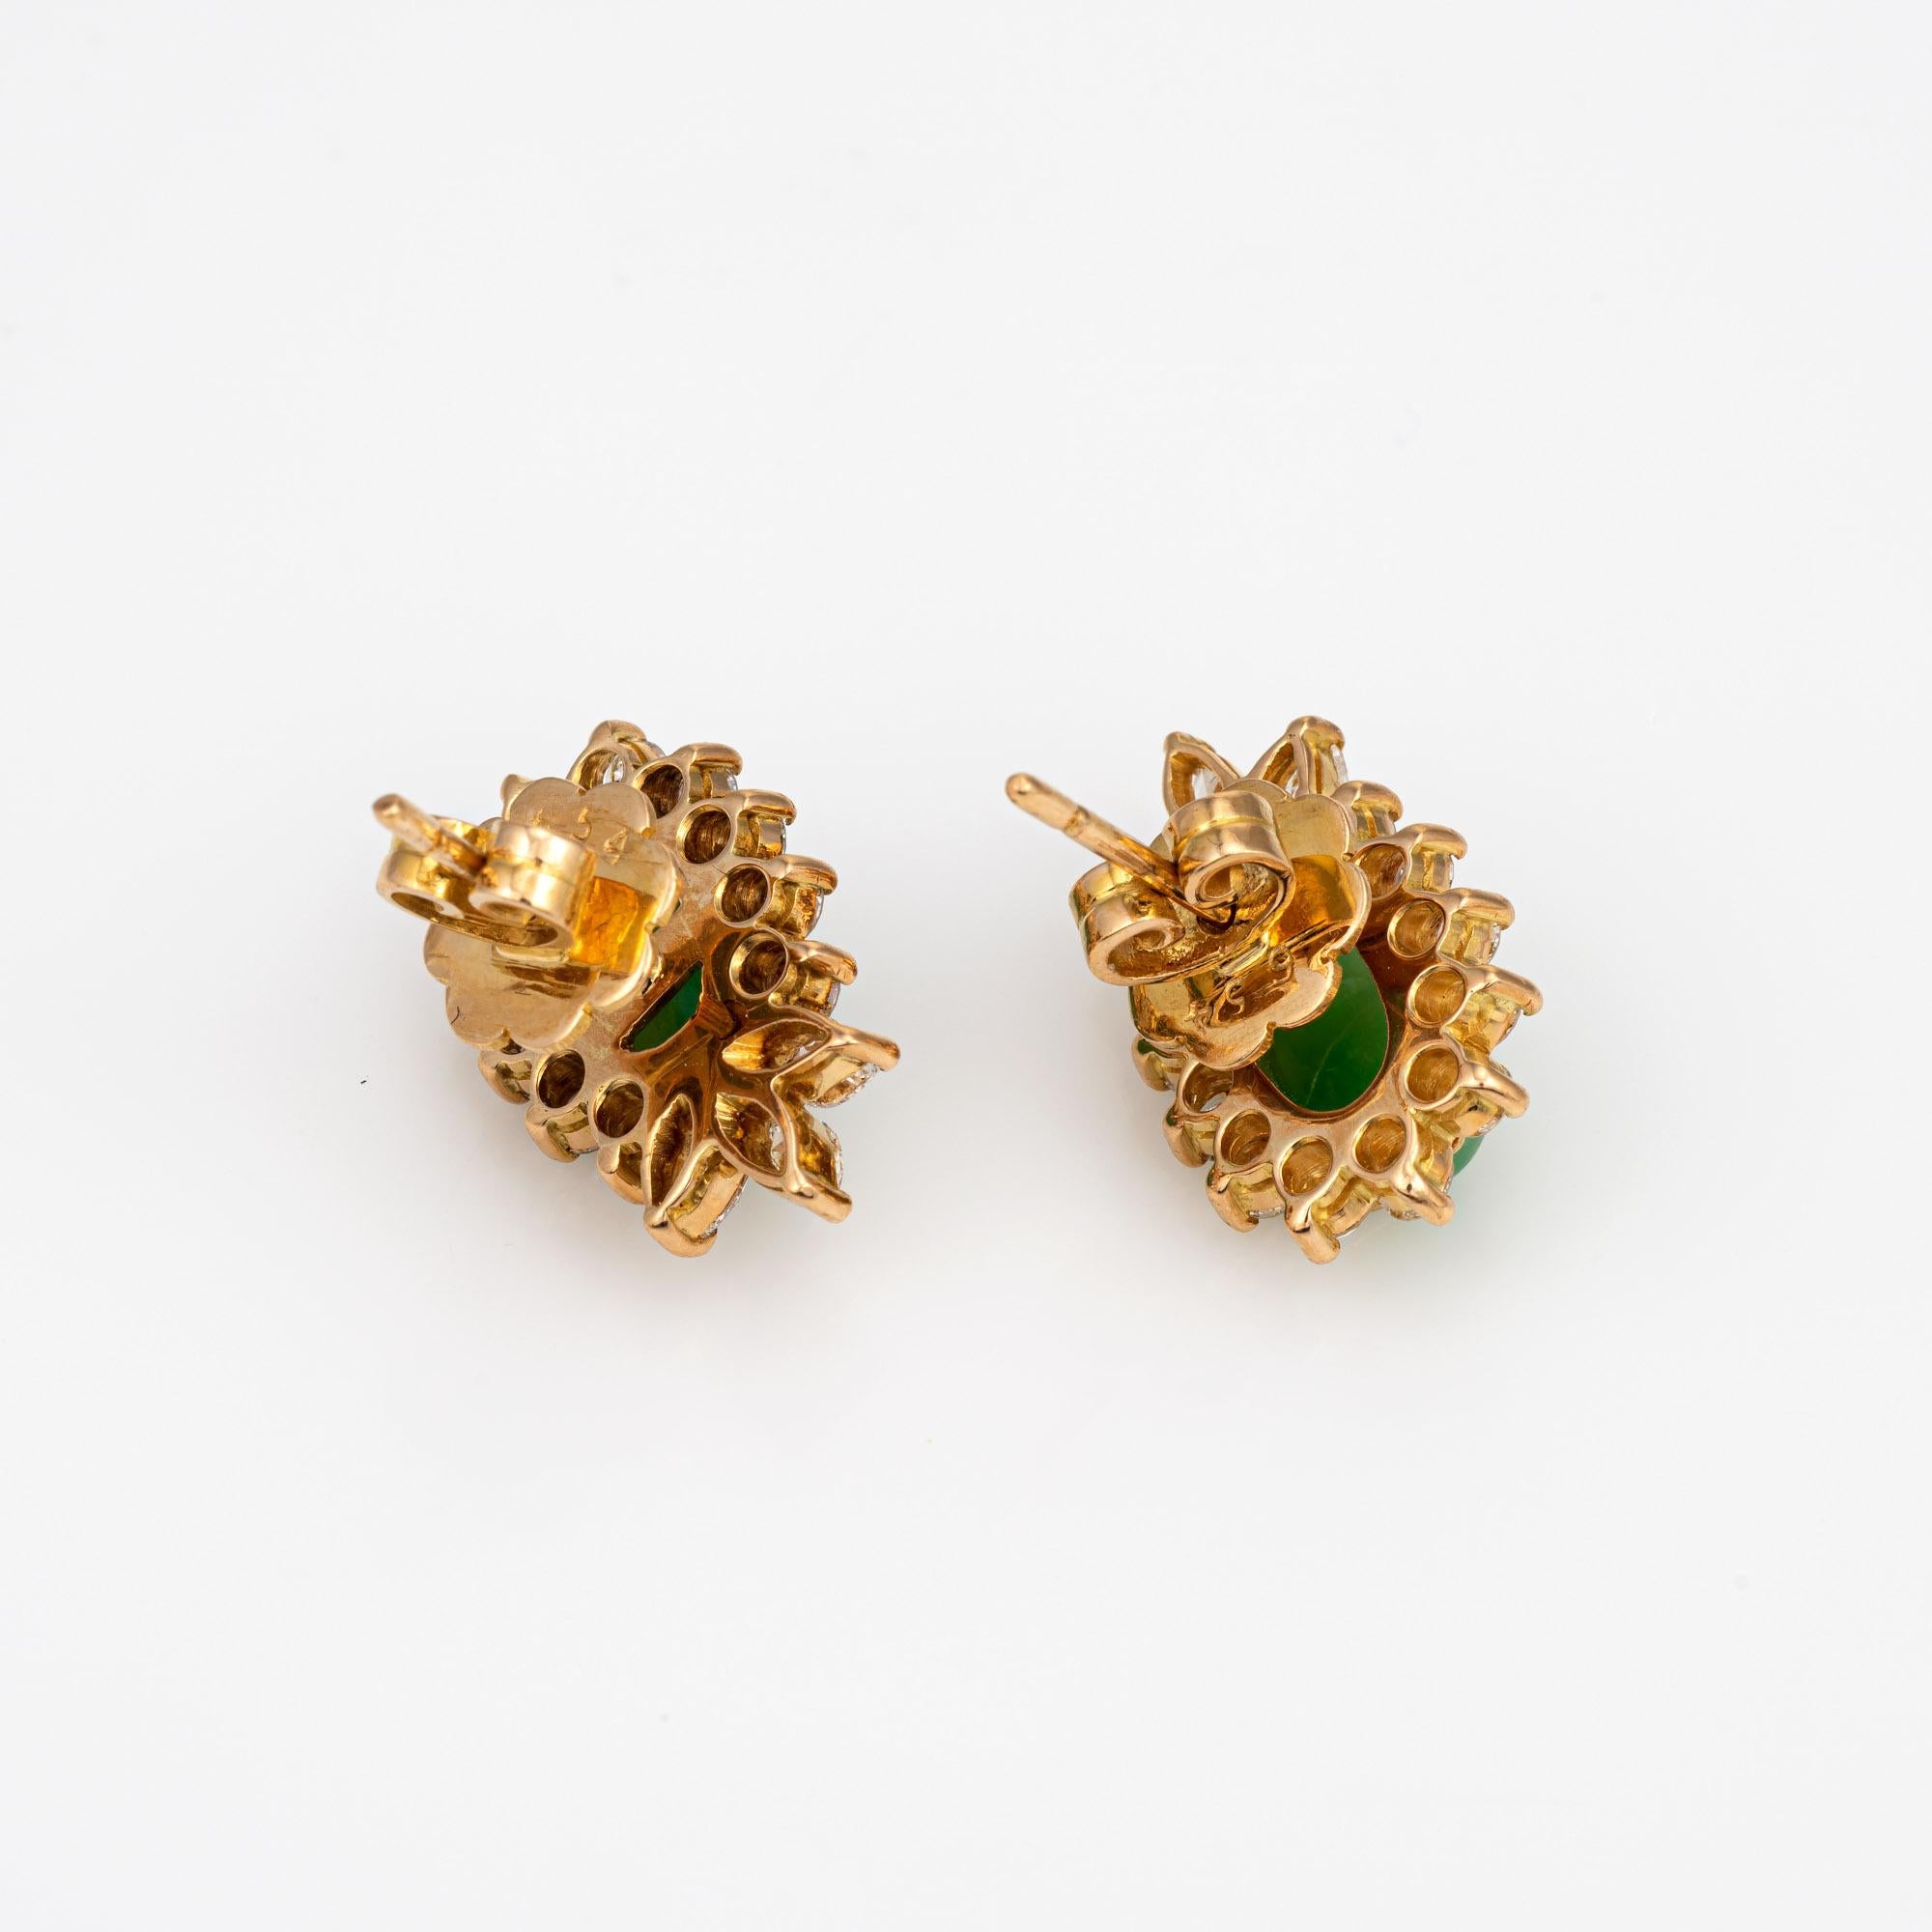 Stylish jade & diamond earrings crafted in 14k yellow gold.

Round brilliant and marquise cut diamonds total an estimated 2 carats (estimated at H-I color and VS2-SI2 clarity). The jade measures 10mm x 6mm. The jade is in very good condition and